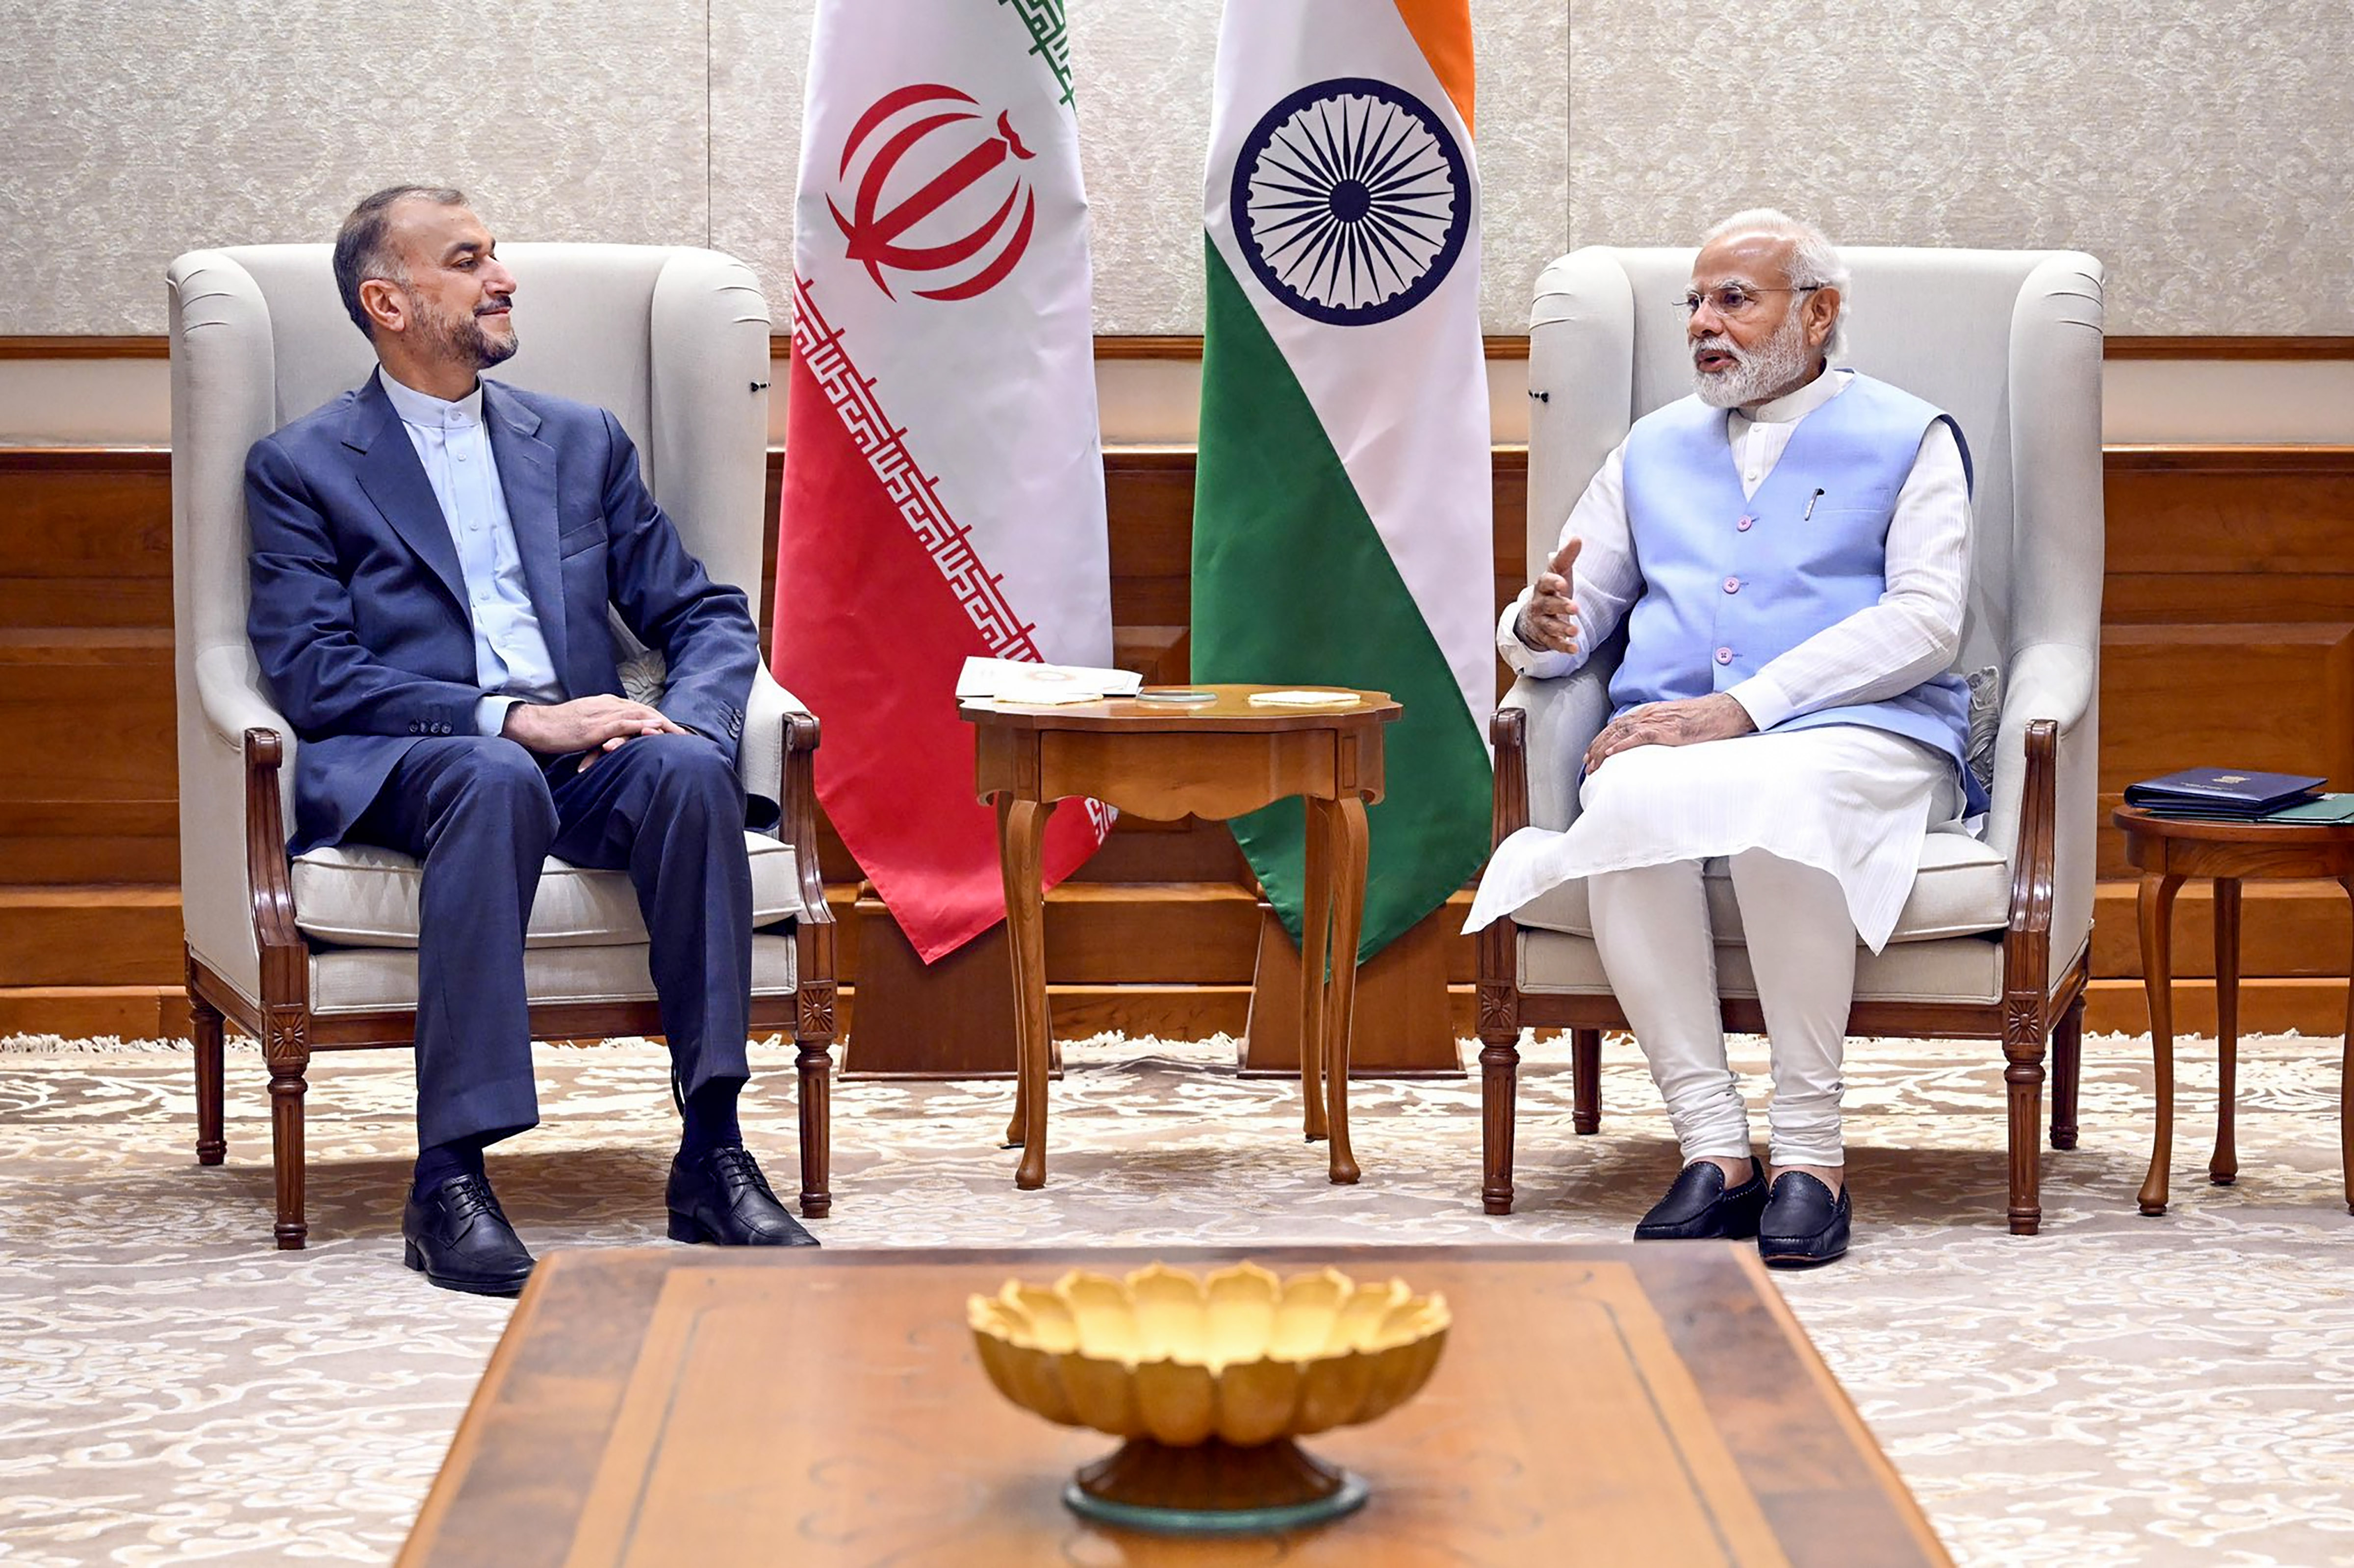 Indian officials have strongly condemned comments on Prophet, notes Iranian Foreign Minister